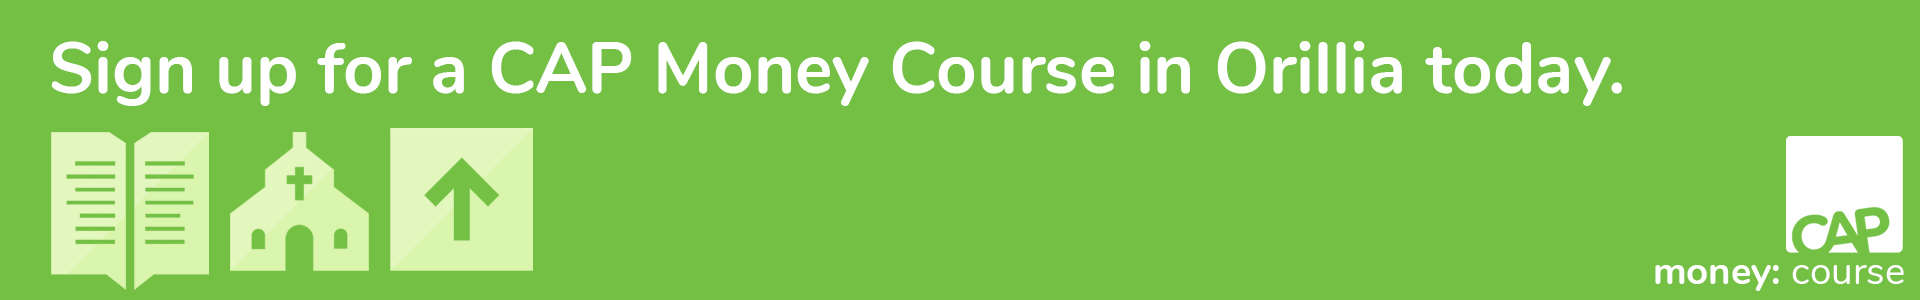 sign up for a CAP money course in Orillia today